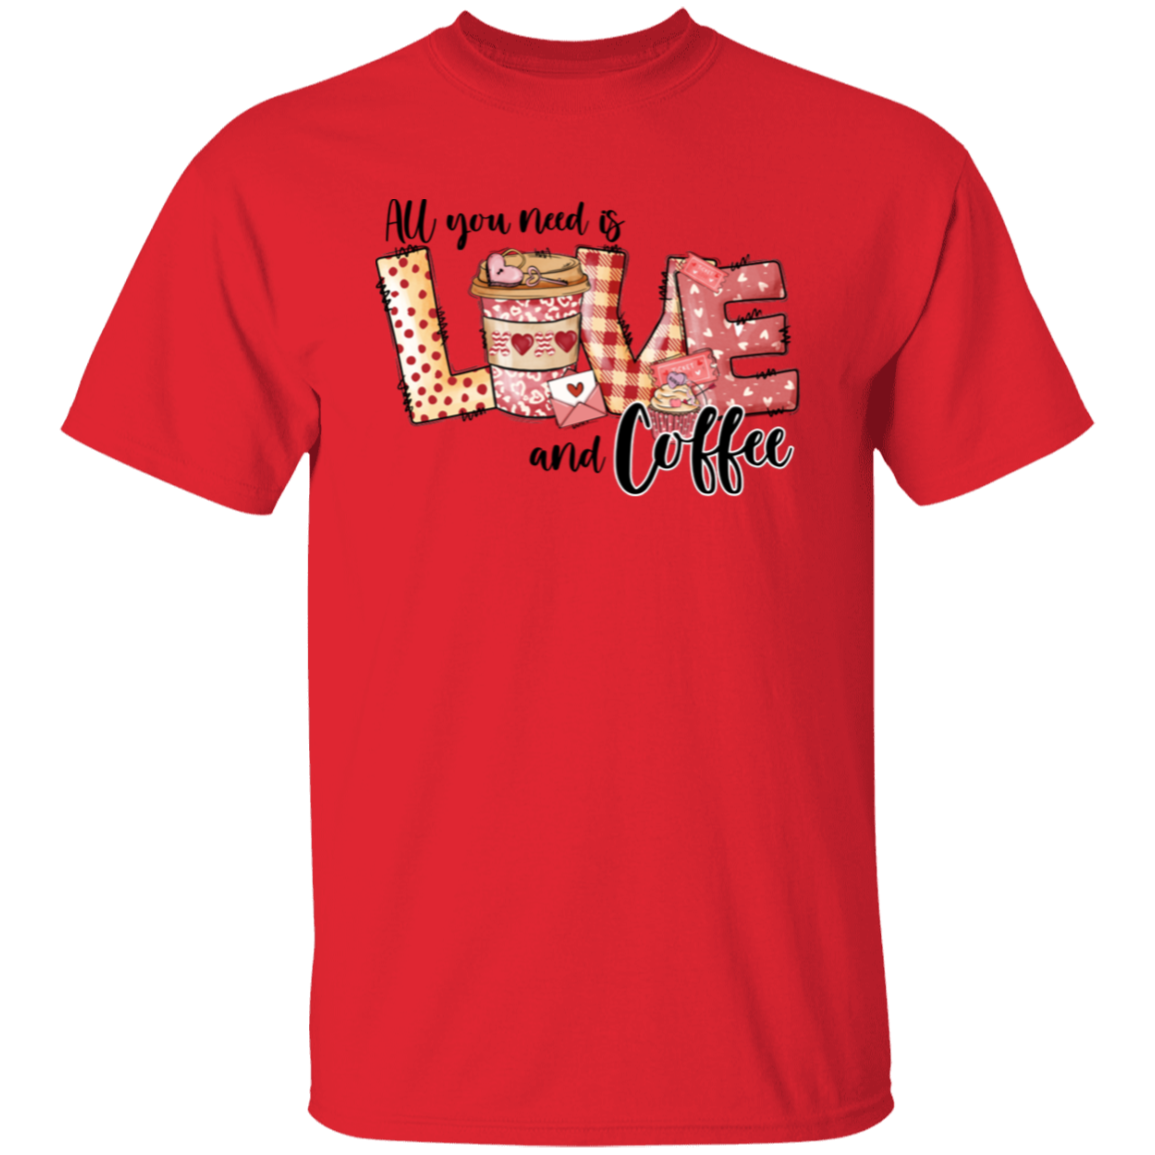 All You Need is Love and Coffee | Valentine |  T-Shirt